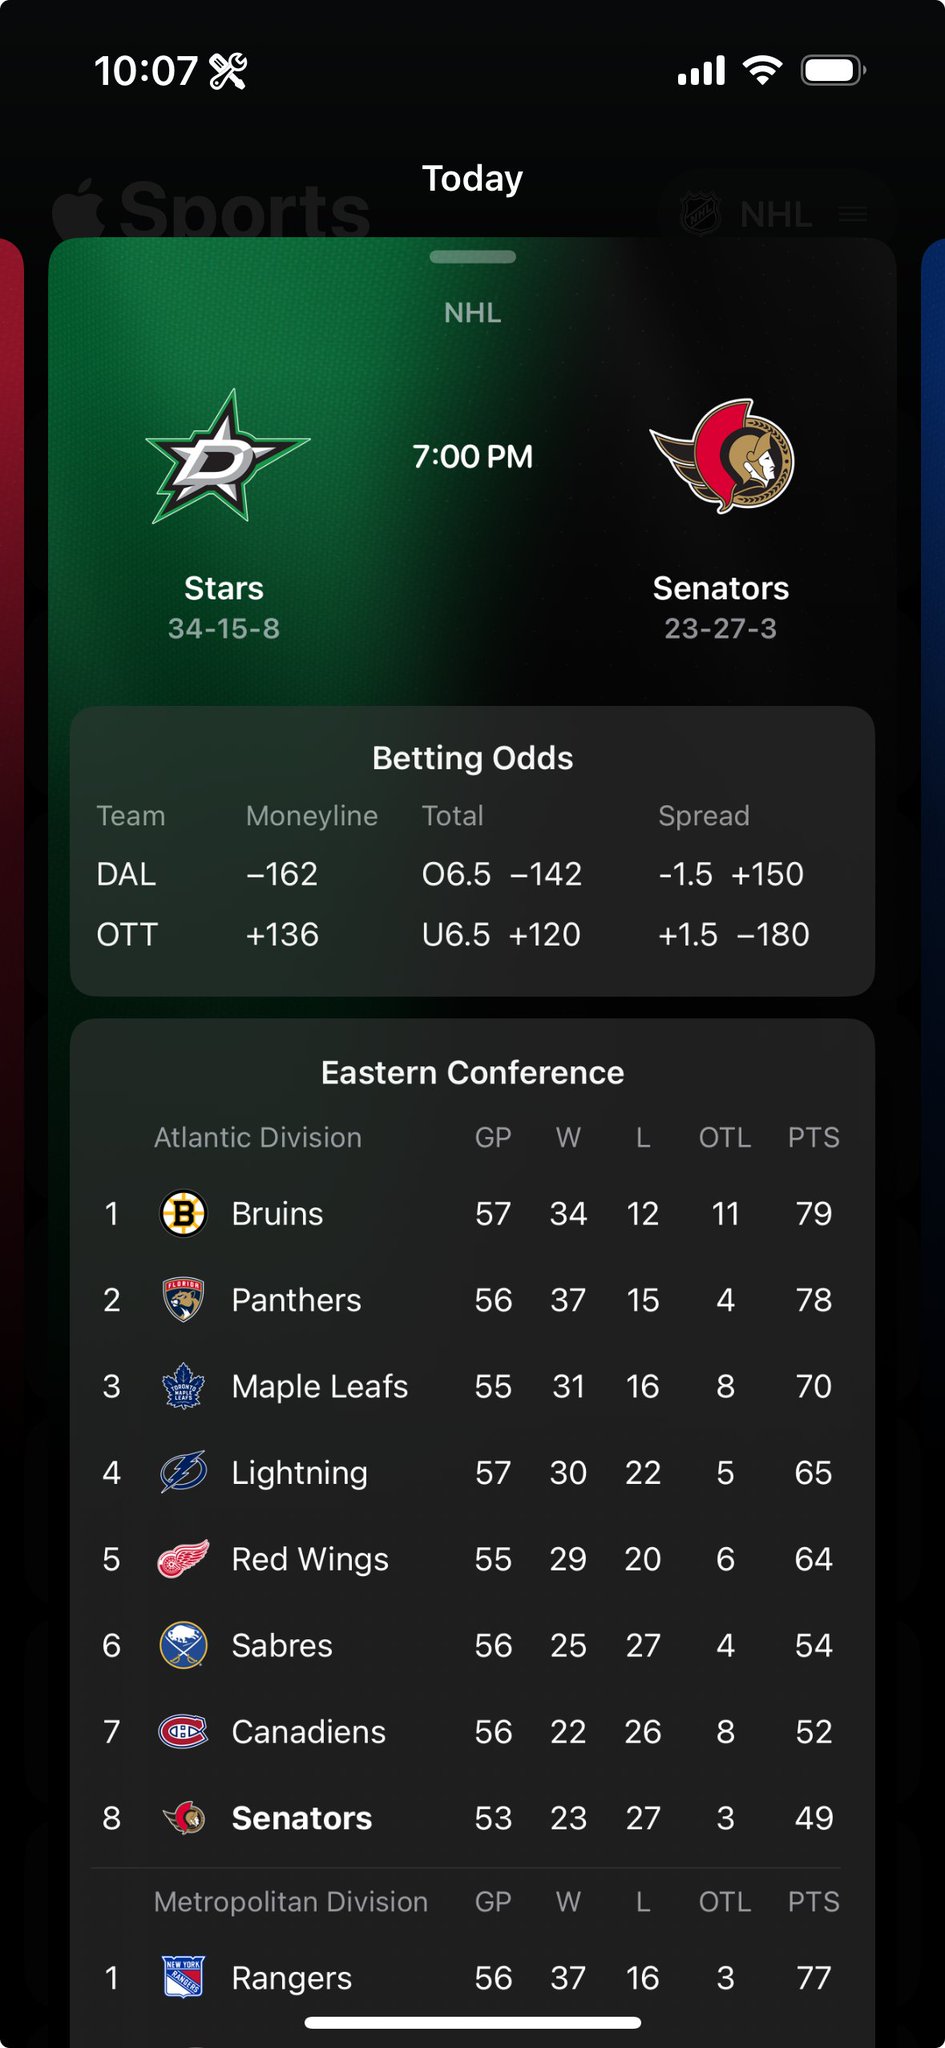 The details for an upcoming game, with betting odds and division standings on a translucent platter. The headers use vibrancy, with a bit of the background color coming through.